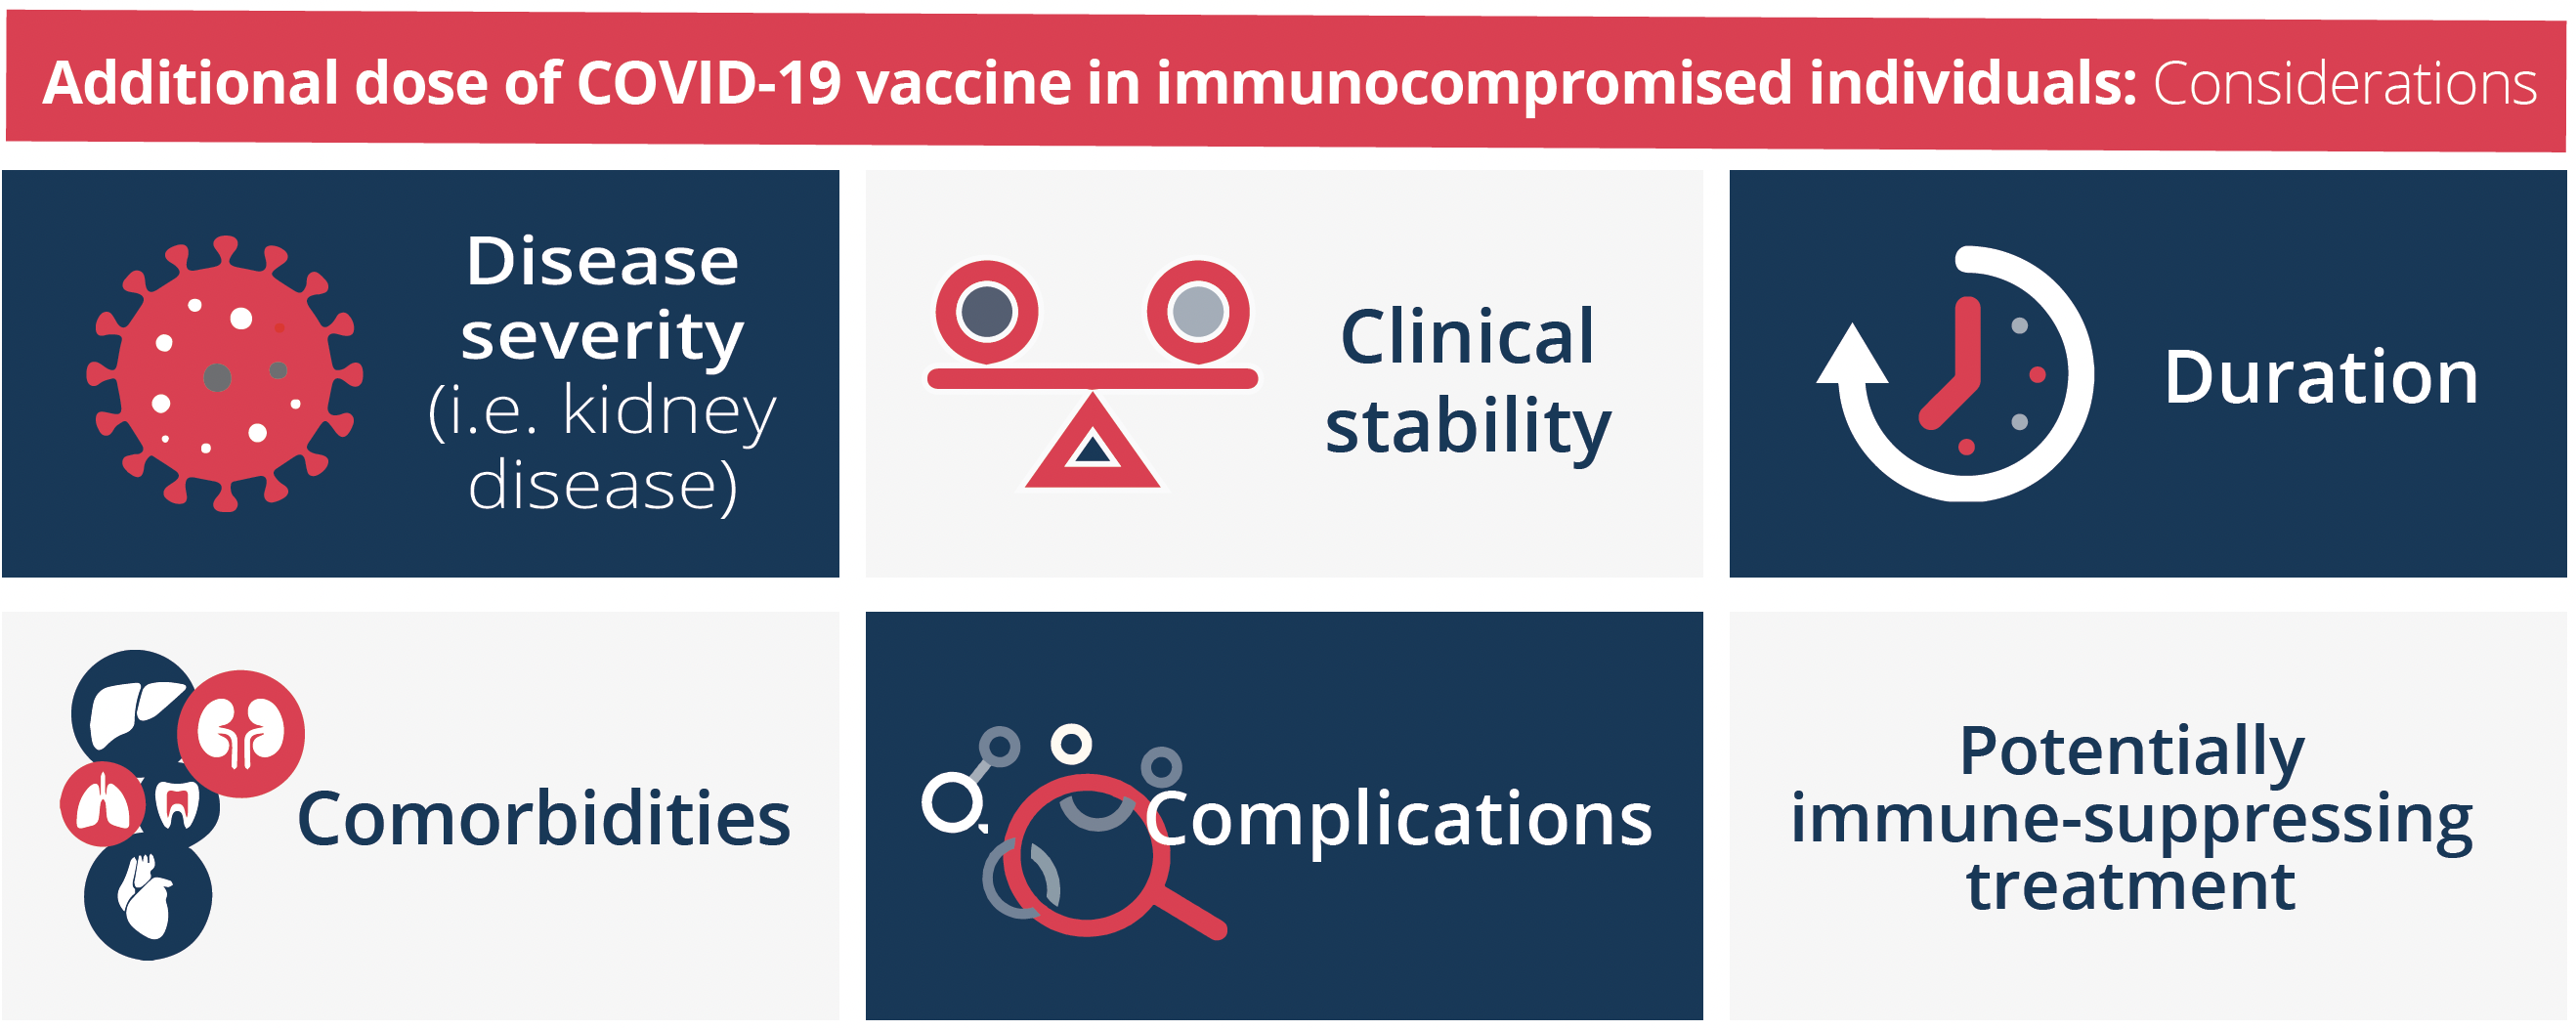 Considerations of when is the optimal time to administer an additional dose of the COVID-19 vaccine in immunocompromised individuals include comorbidities and complications